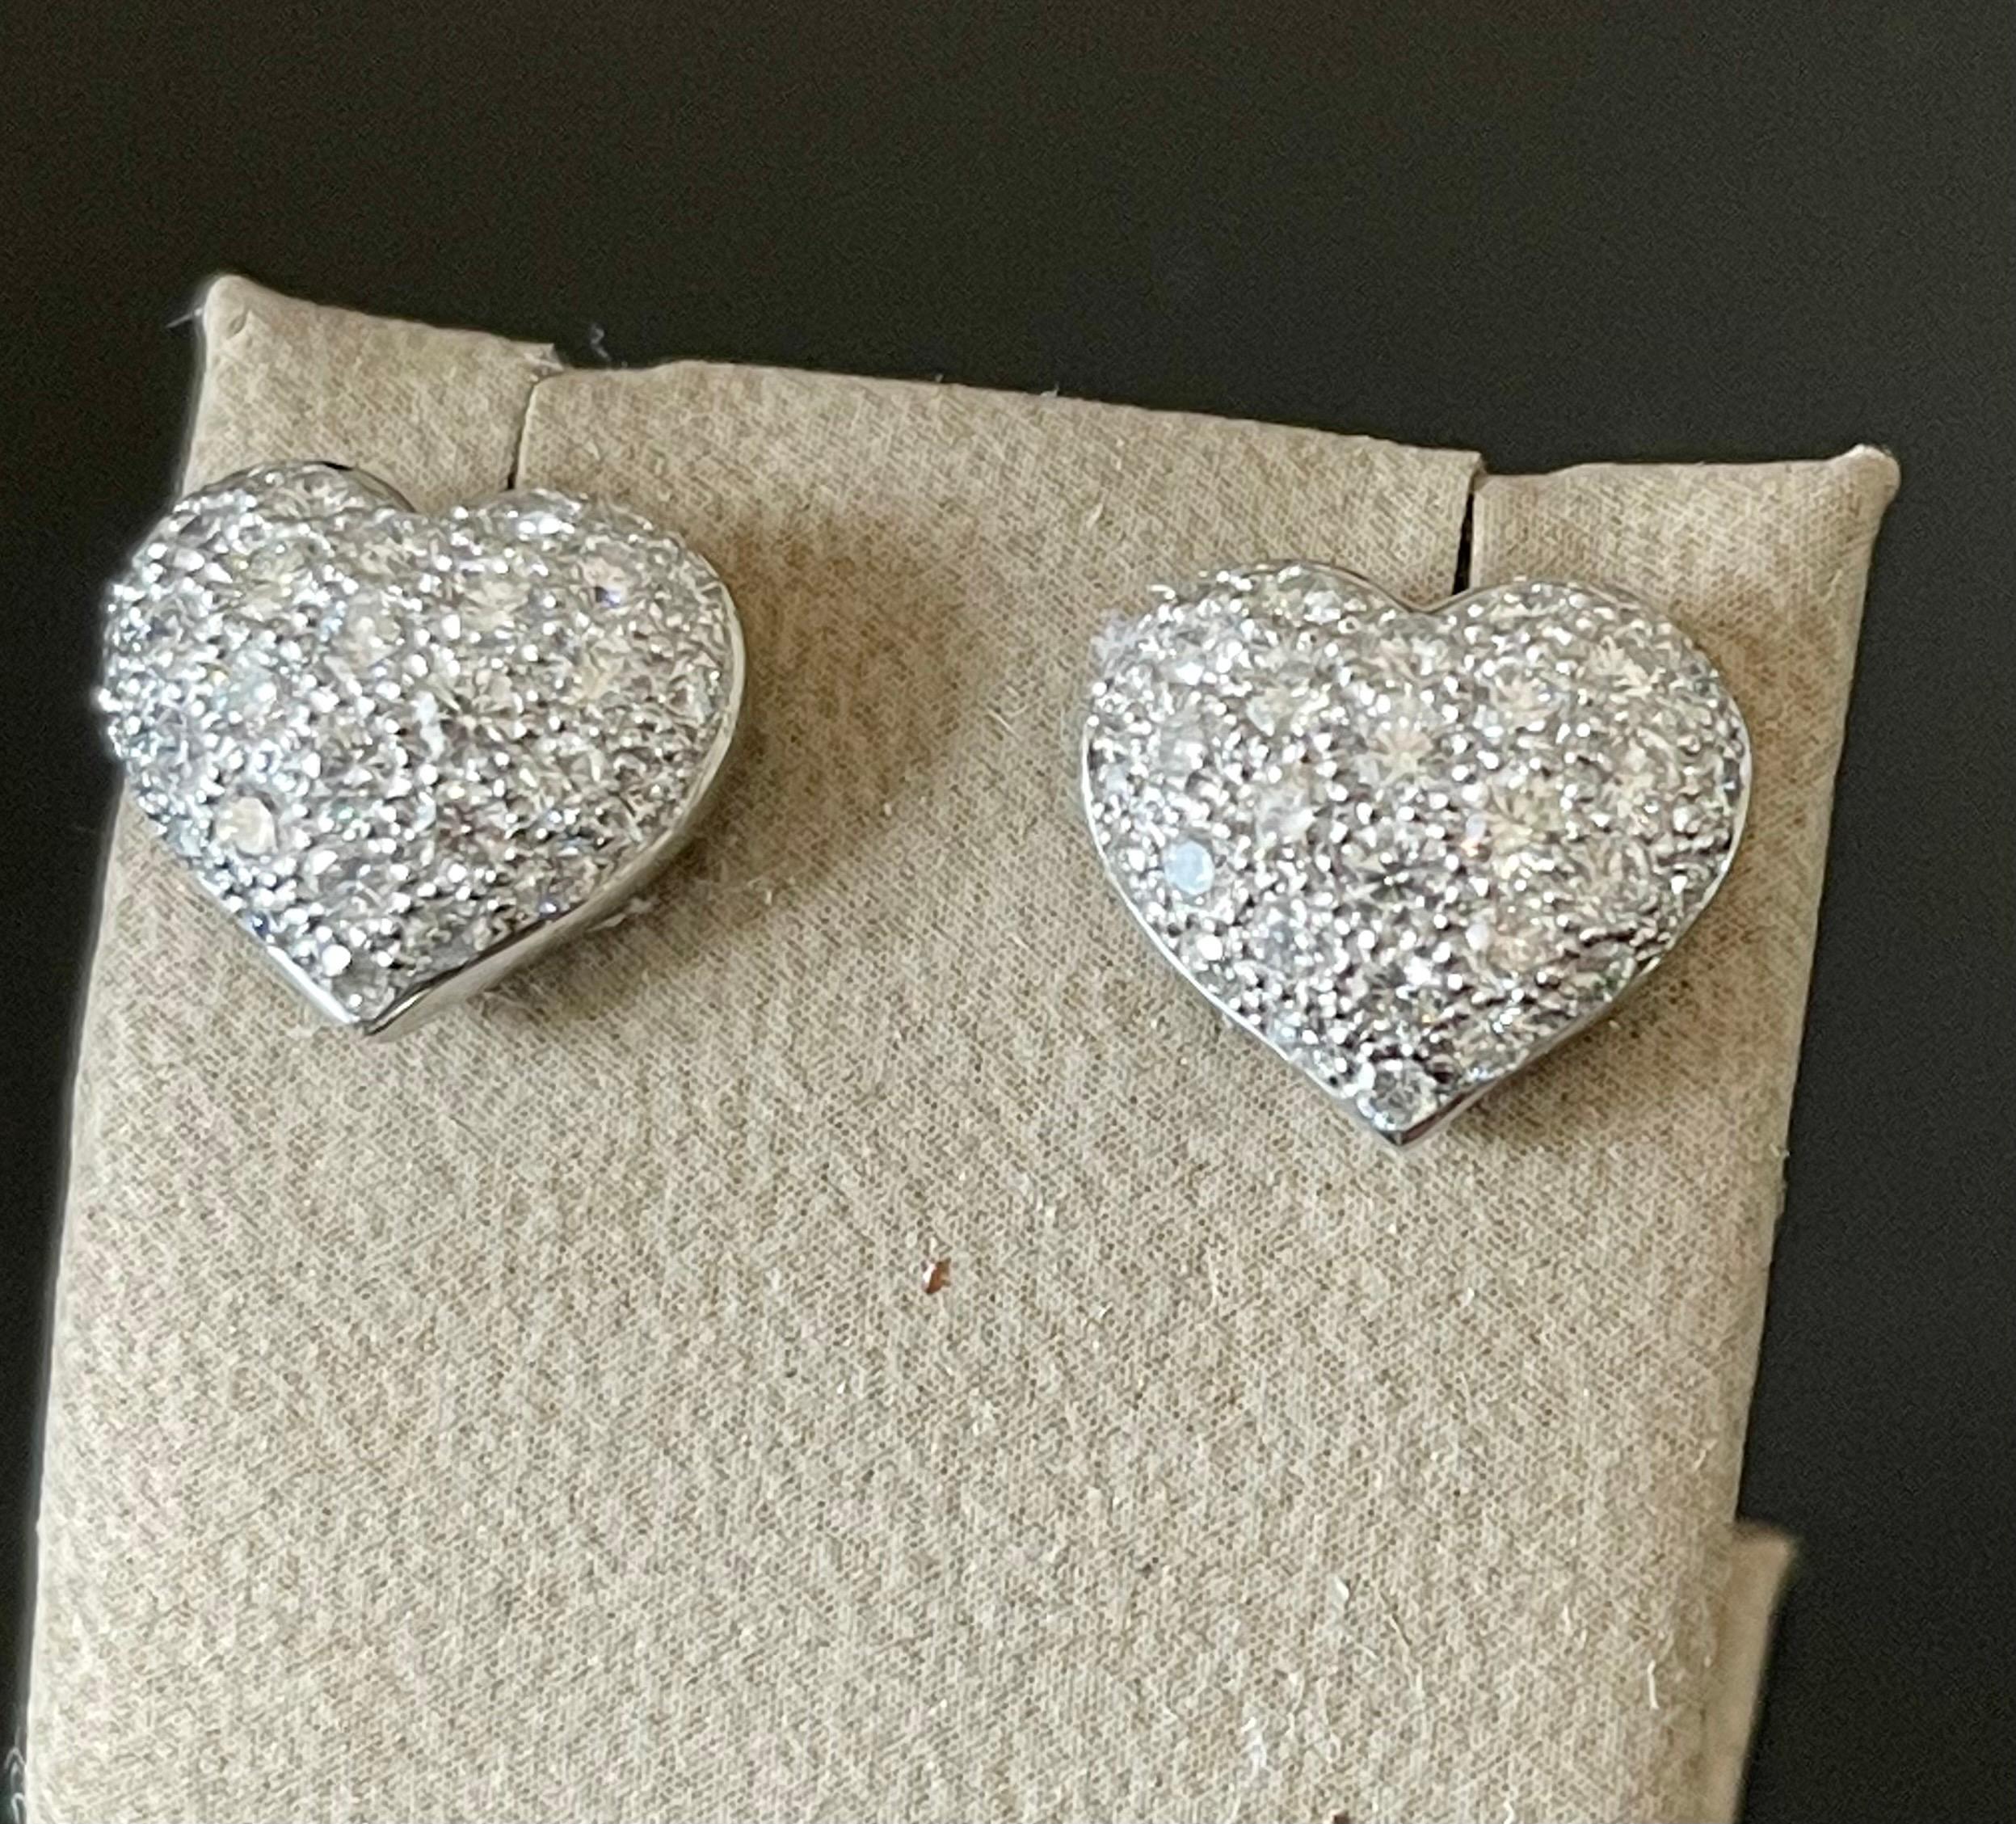 These stunning 18 K white Gold heart shaped pave diamond stud earrings provide a look that is both trendy and classic. These diamond earrings are a great staple to add to your collection, and can be worn with both casual and formal wear. These